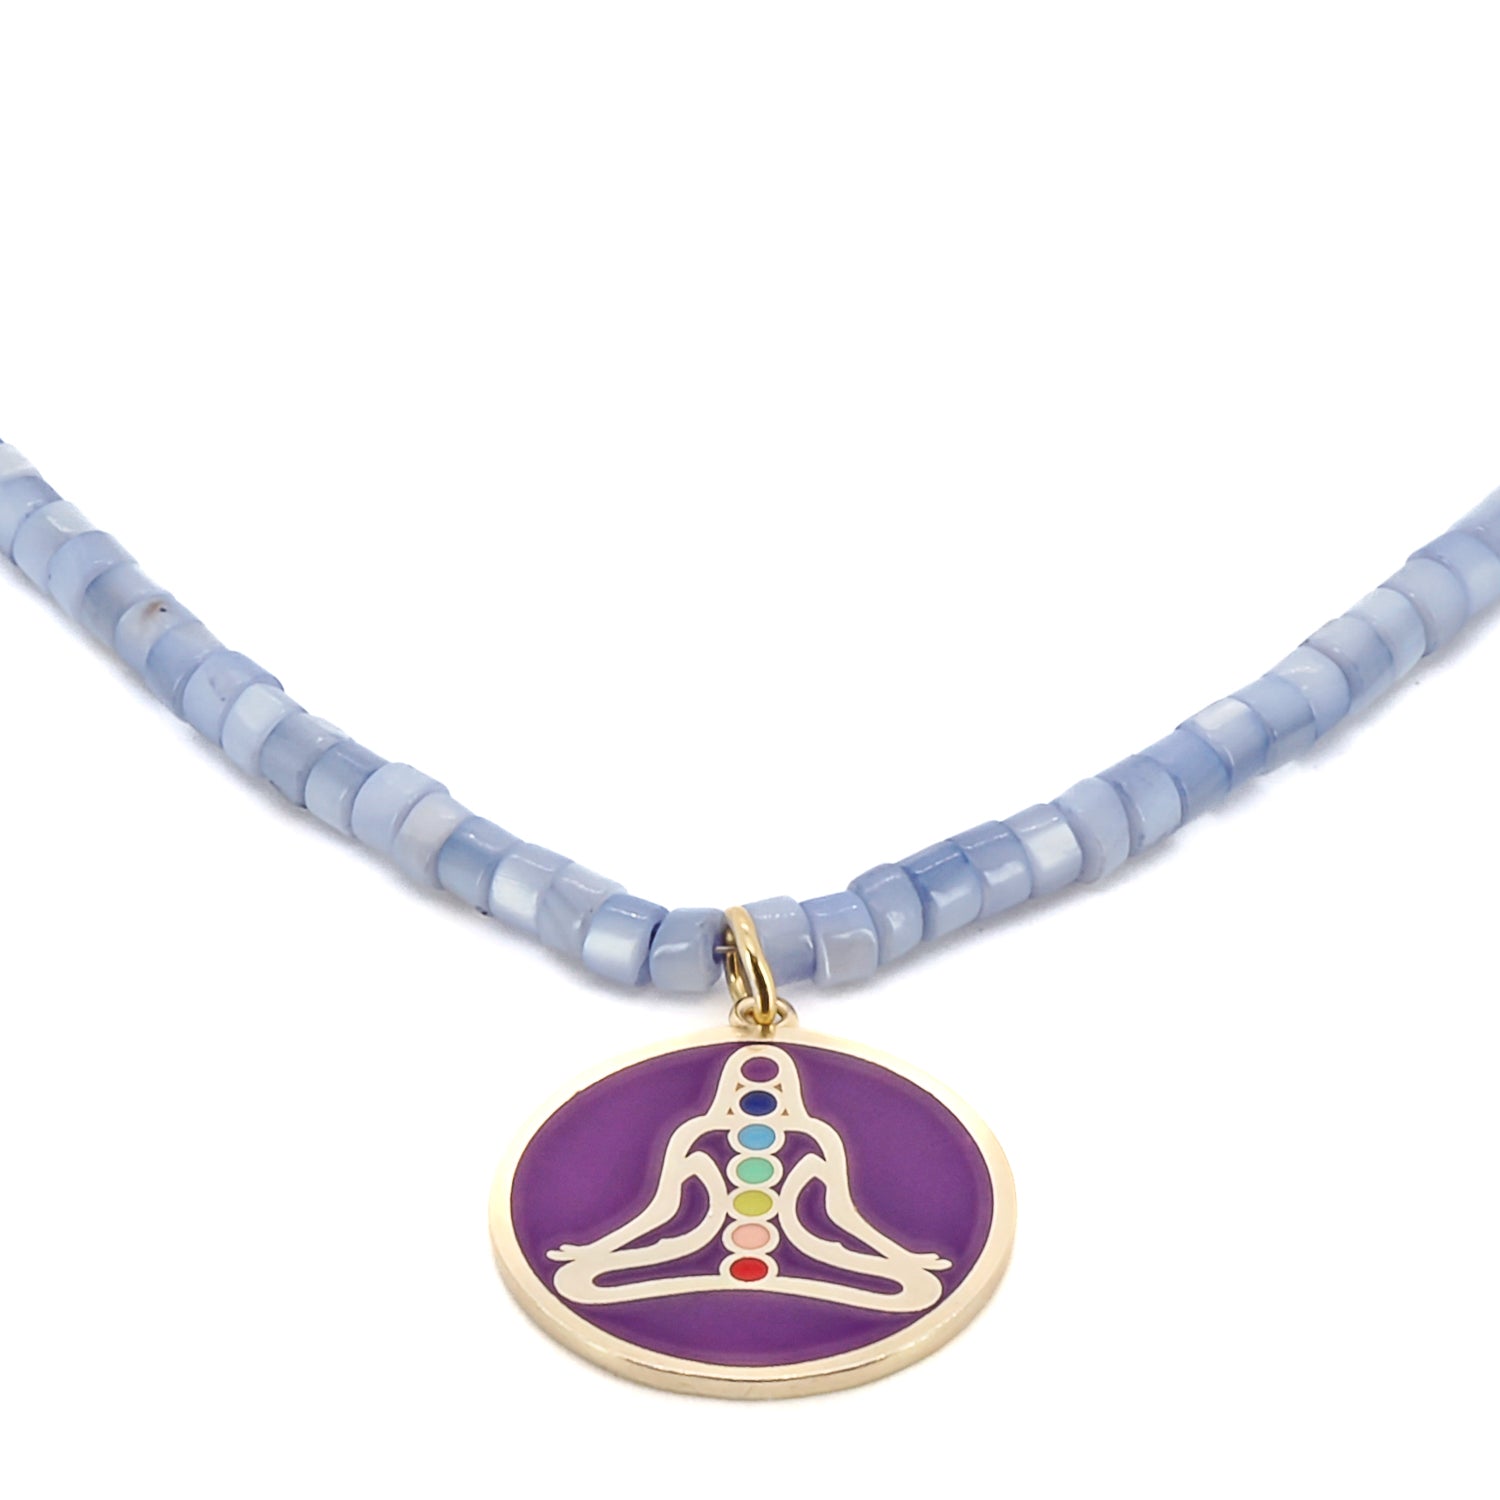 Unique necklace with a purple chakra pendant and soothing pearl stone beads in a lovely lilac hue.